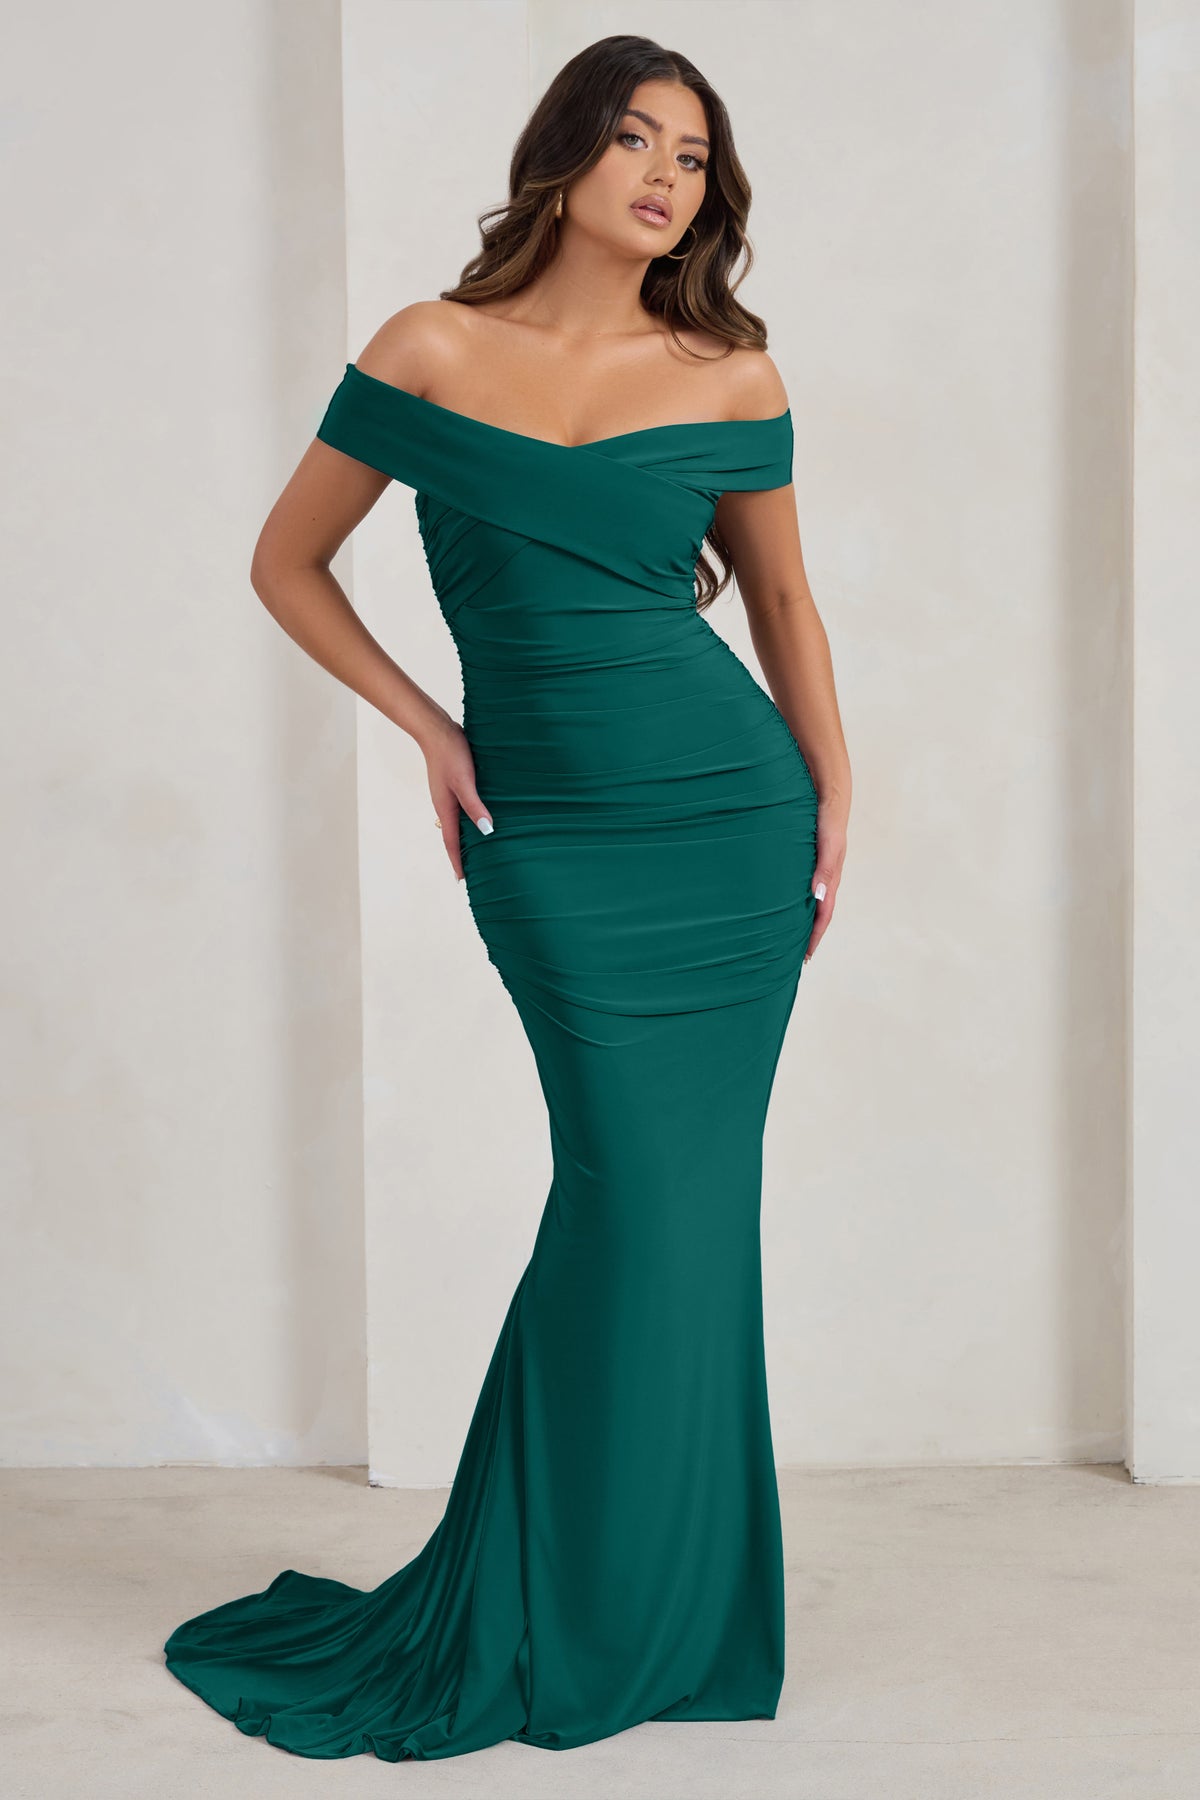 Apolline Bottle Green Off The Shoulder Ruched Fishtail Maxi Dress ...